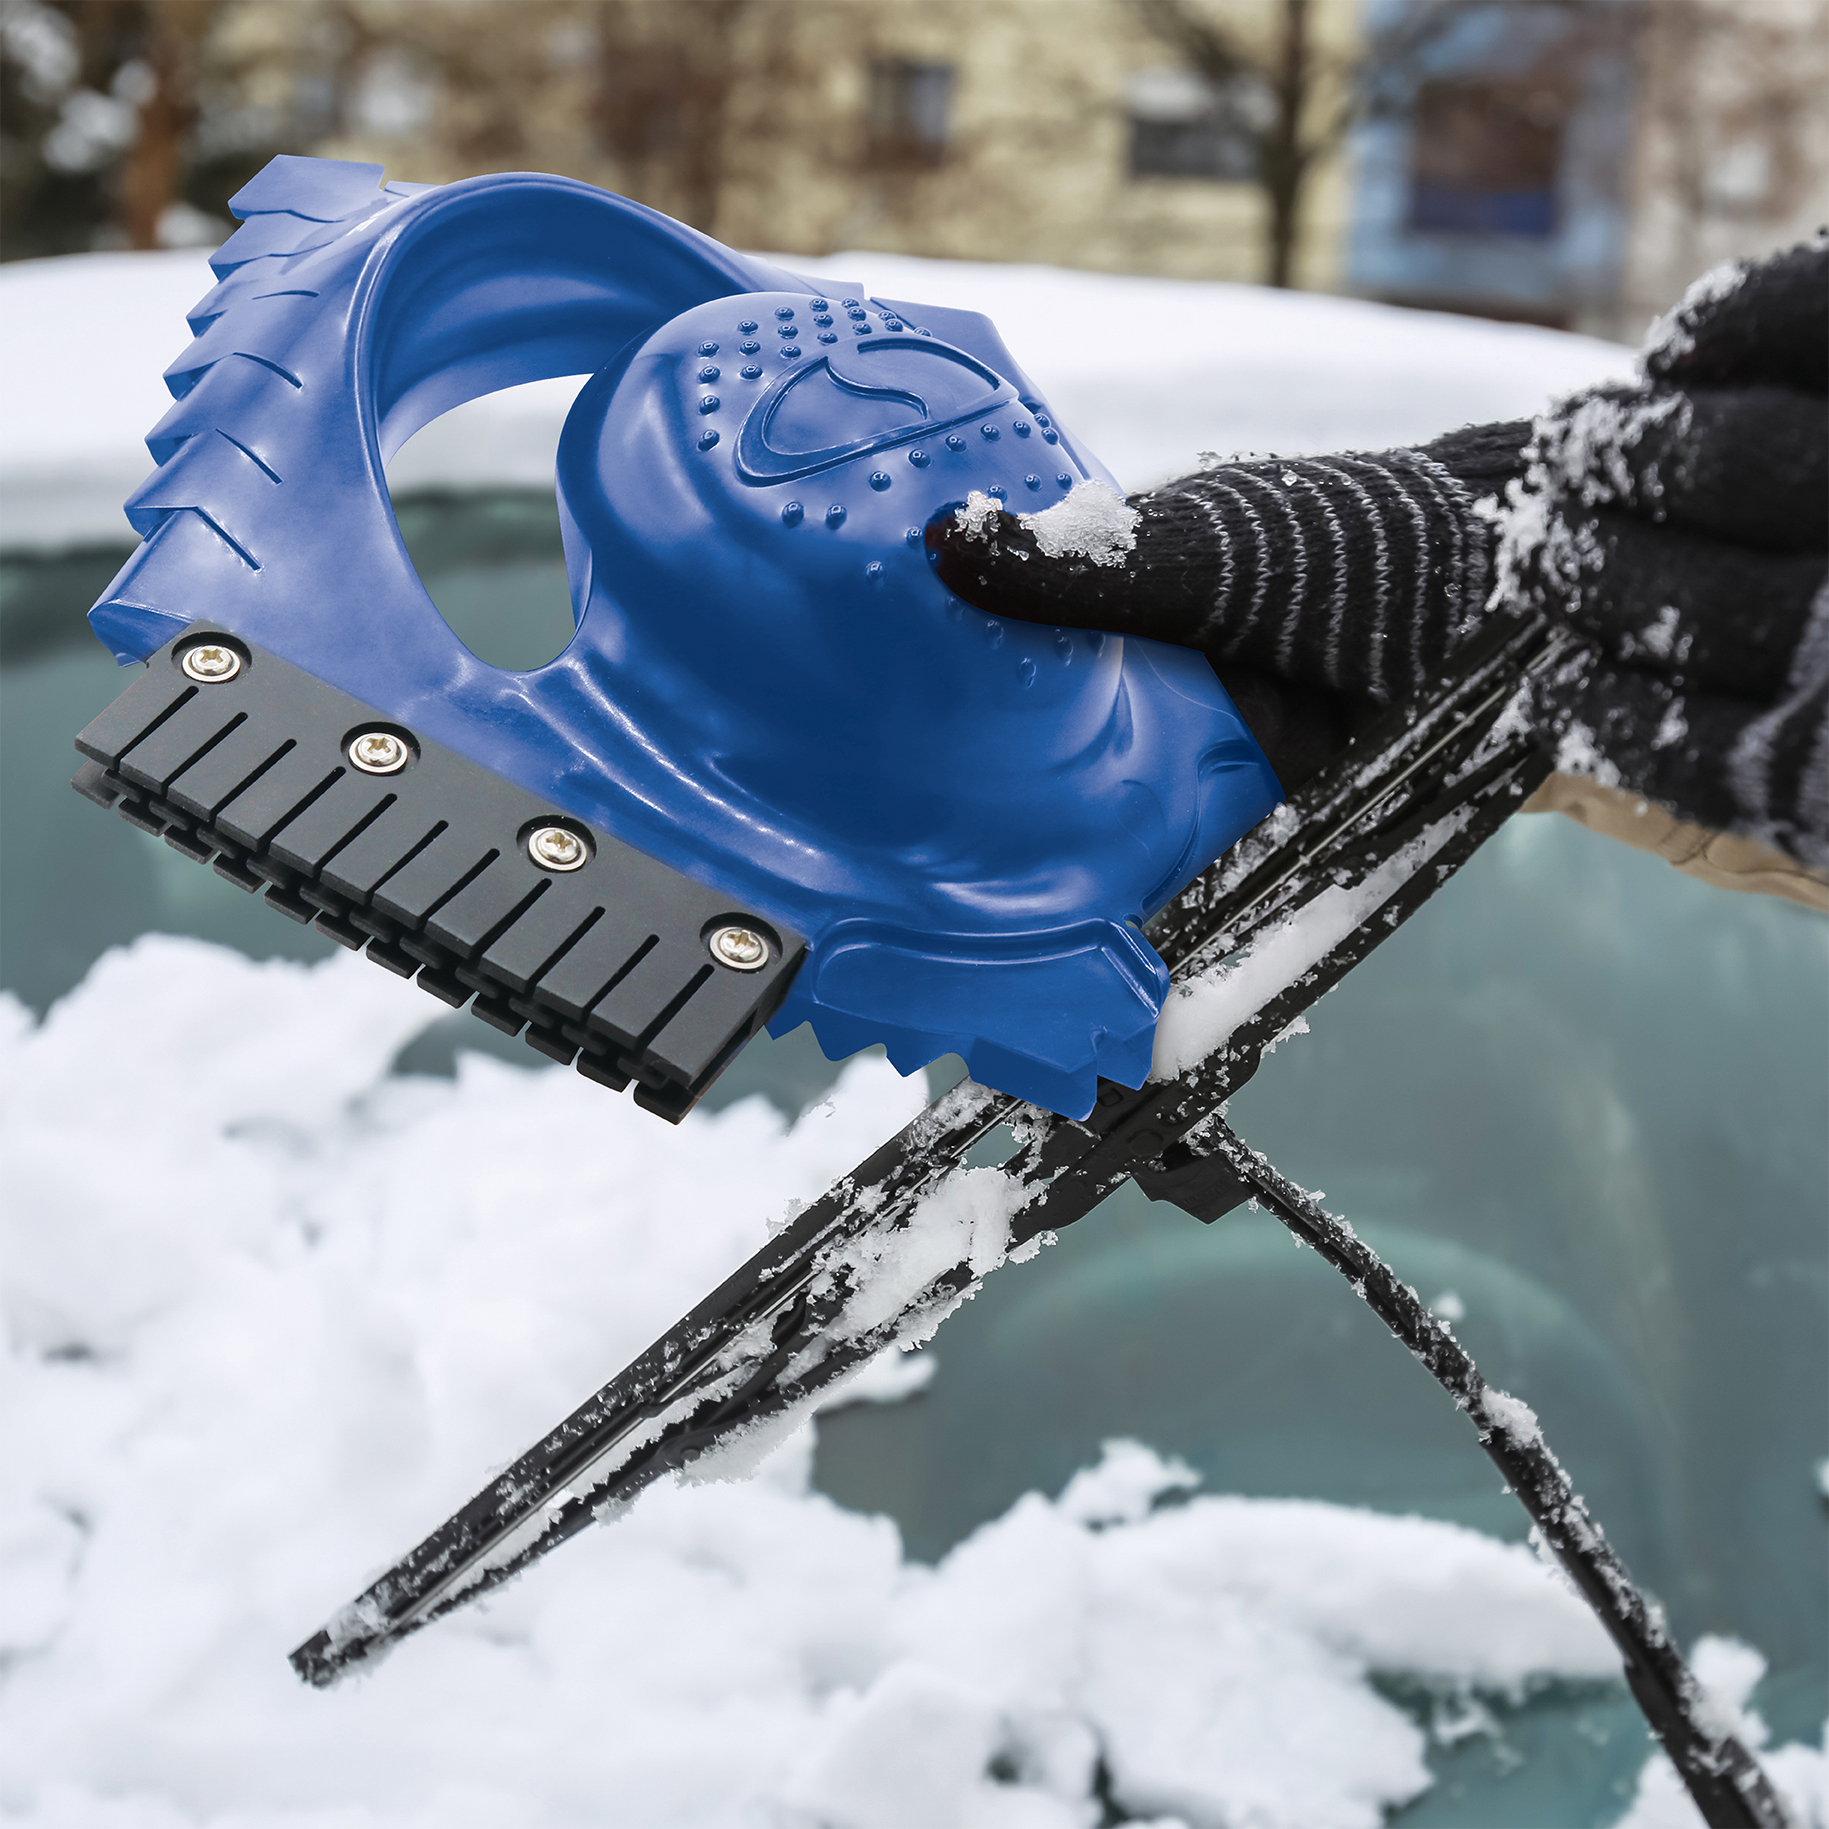 This Ice Scraper Is a Must-have for Winter Storms